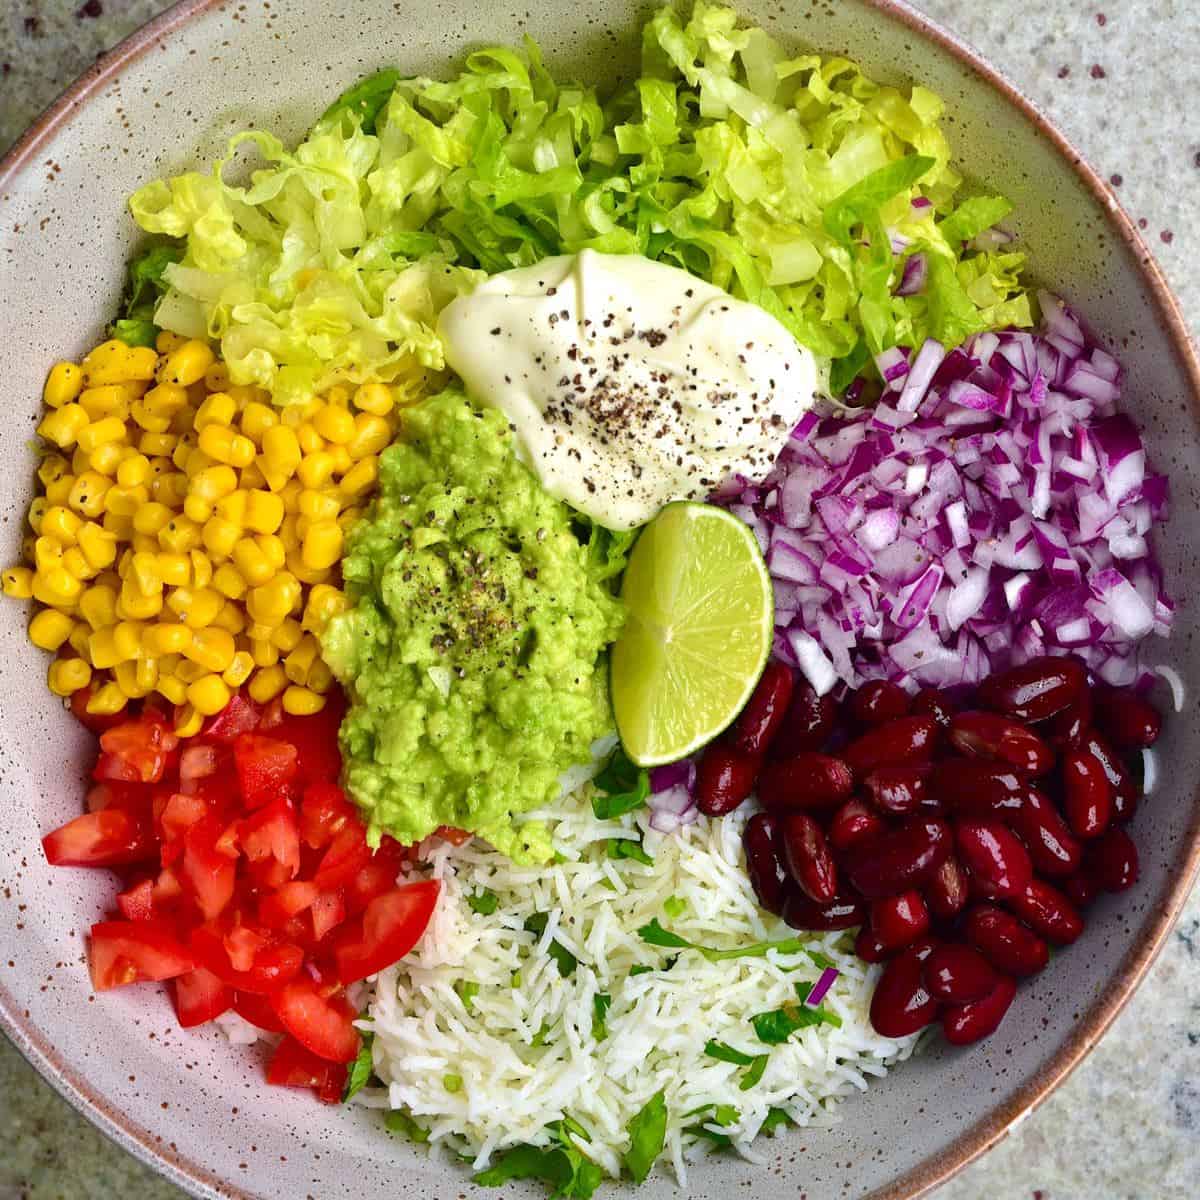 Mexican-Inspired Rice Bowl Recipe, Vegetarian Recipes